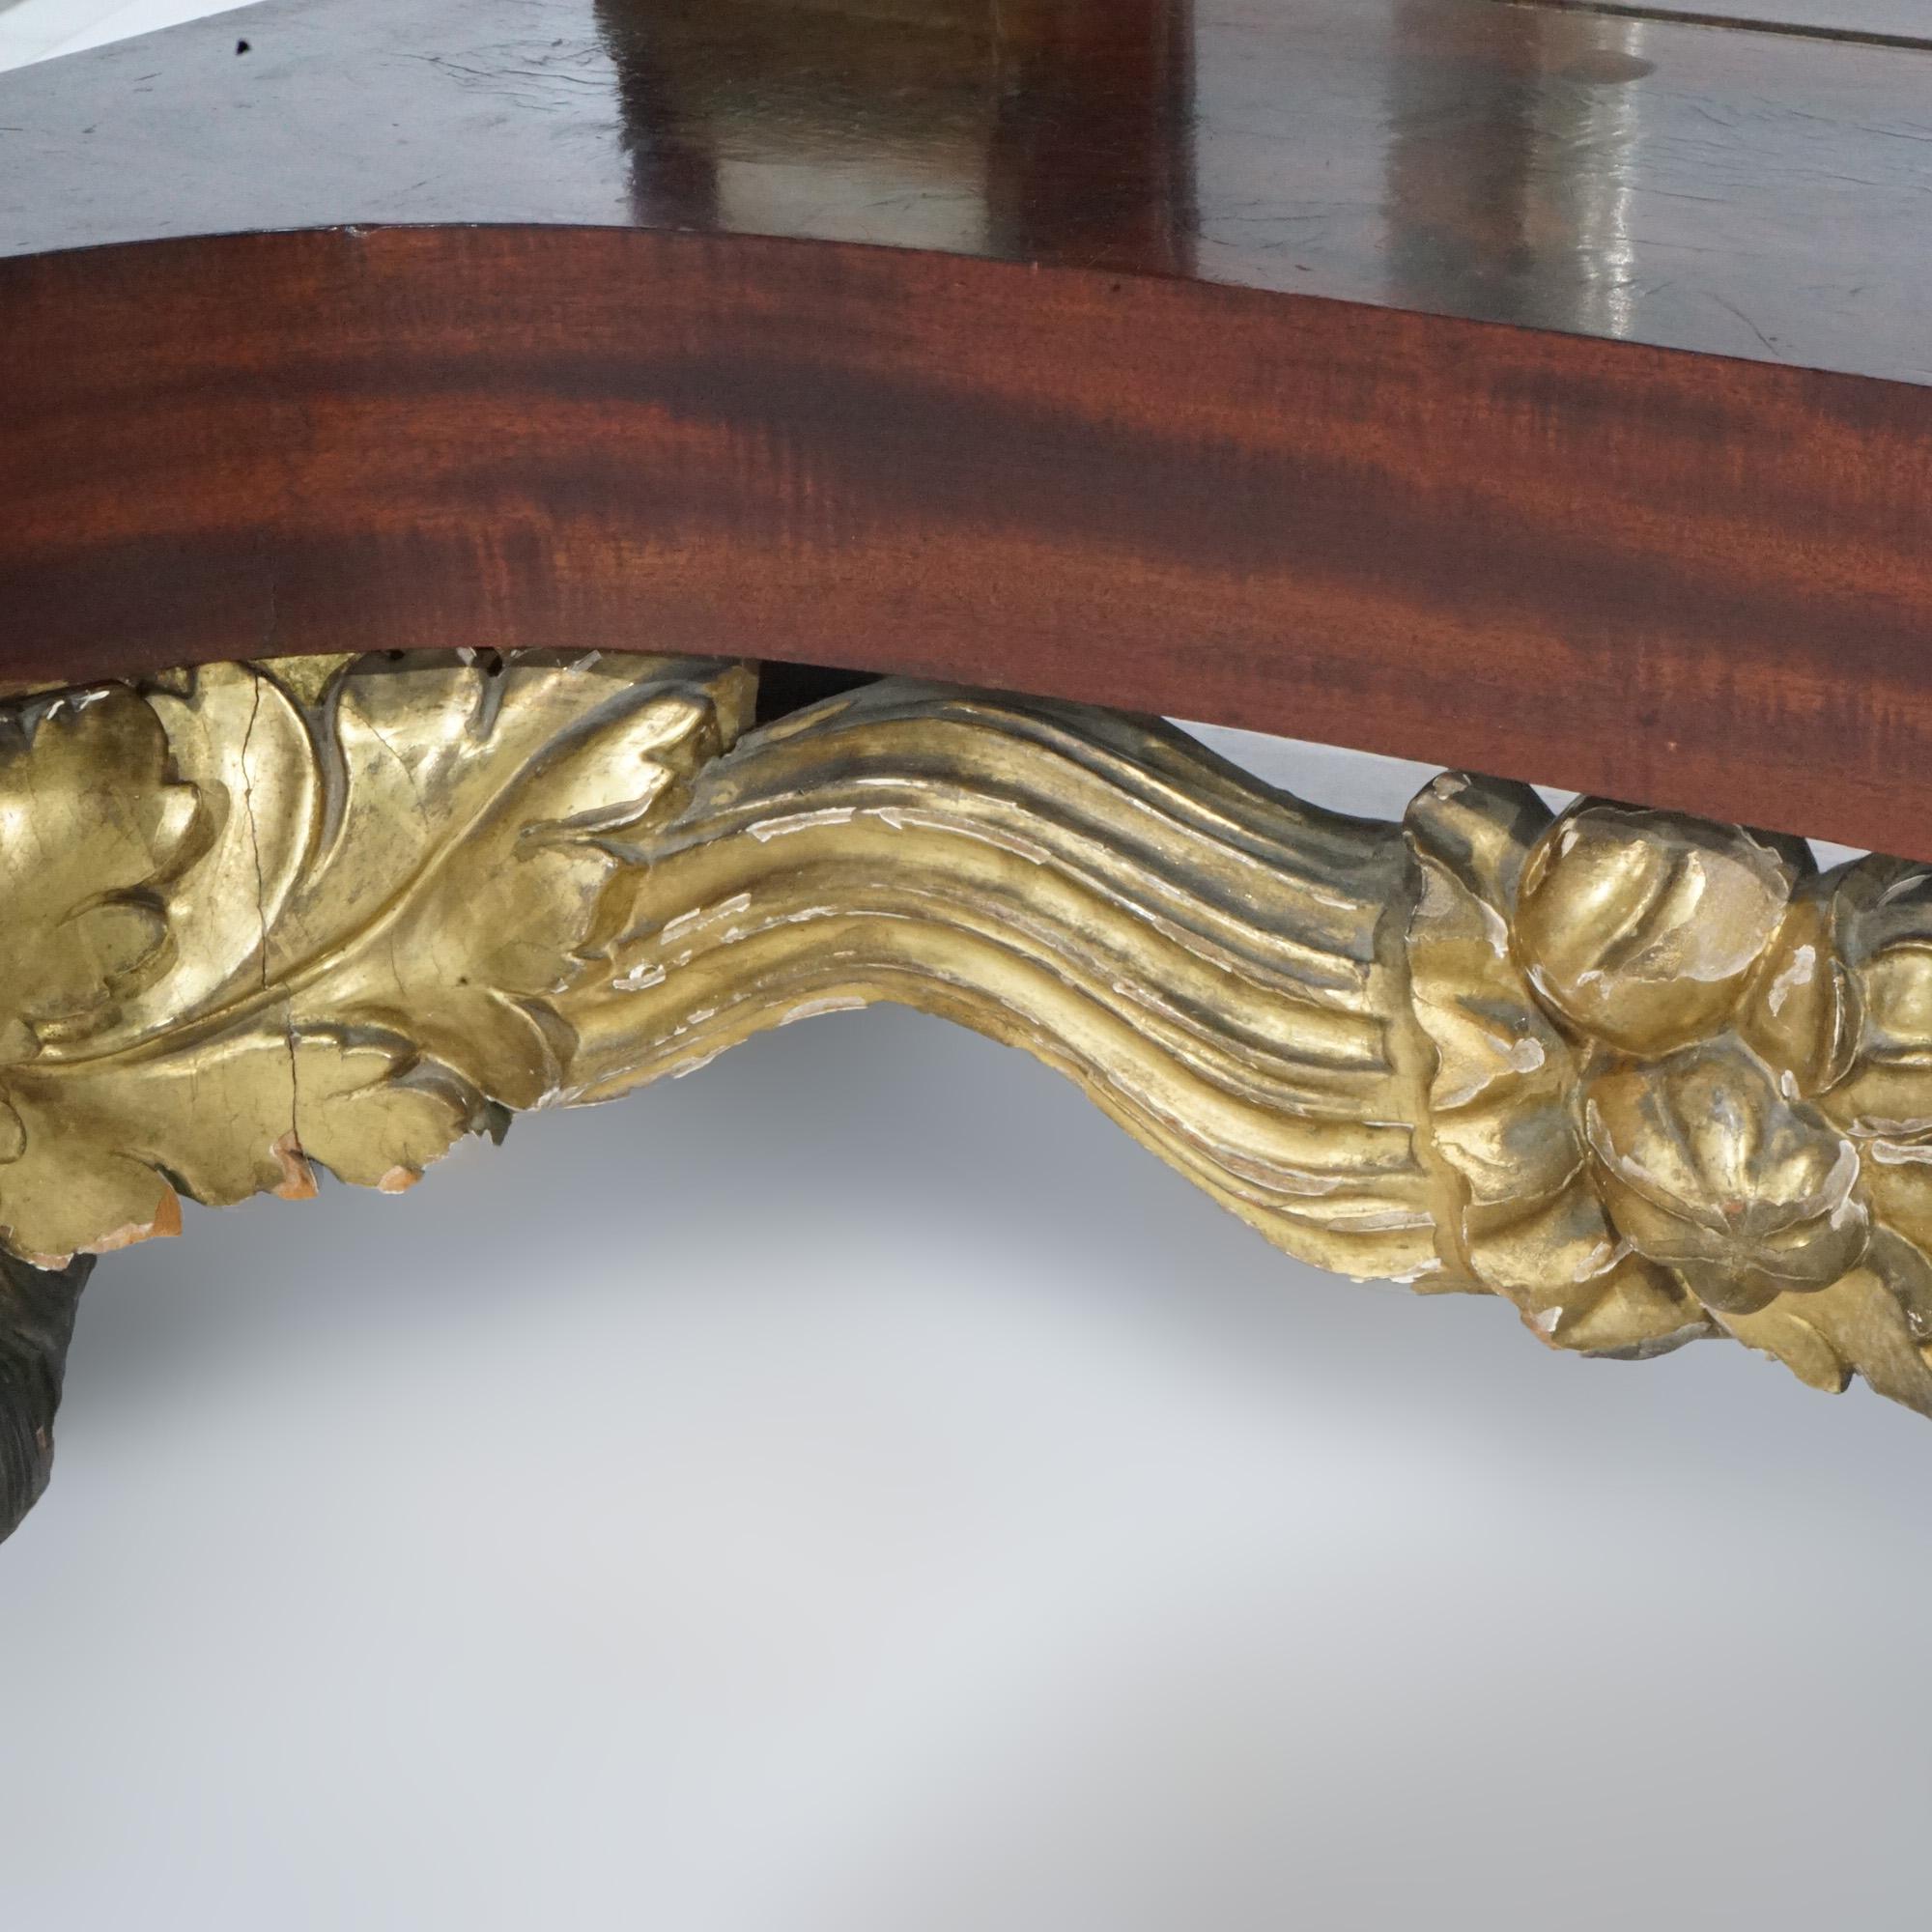 Antique Greco American Empire Flame Mahogany, Marble & Gilt Pier Table, C1830 7